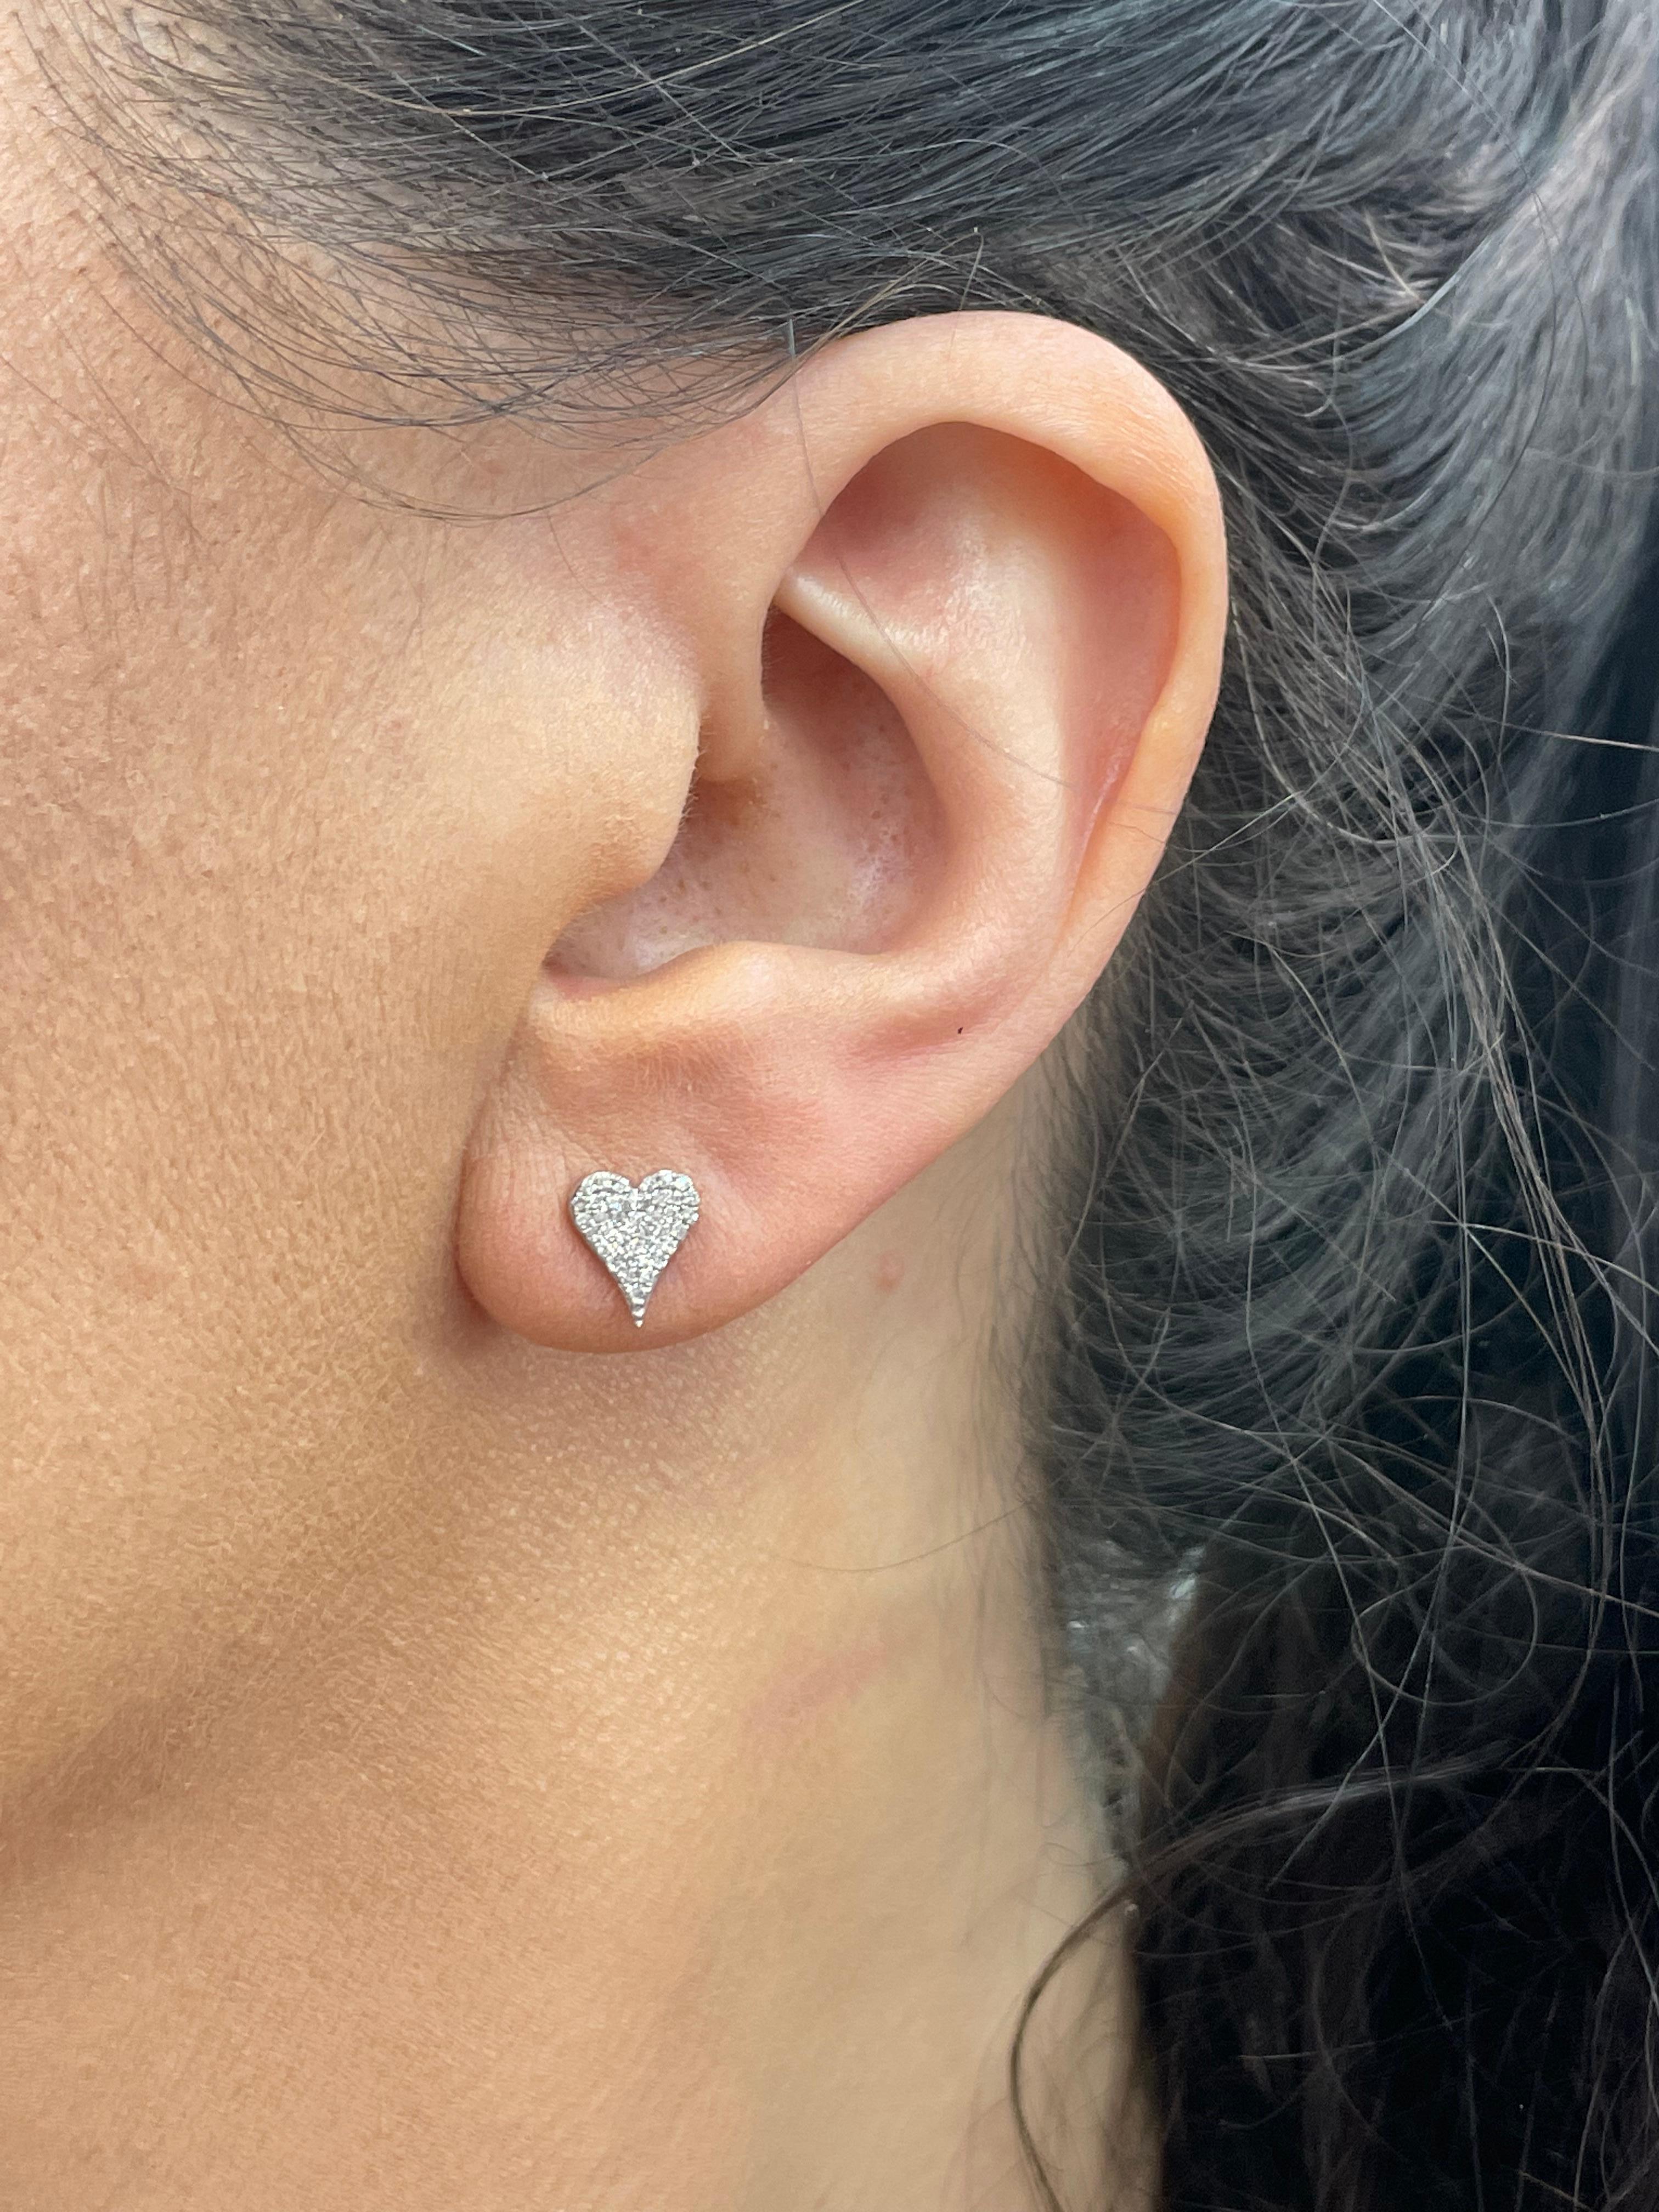 Small heart stud earrings featuring 78 round brilliants weighing 0.20 carats, in 14 Karat White Gold.
Color G-H
Clarity SI

Available in Medium size Yellow Gold
DM for more pictures & pricing. 
Search Harbor Diamonds